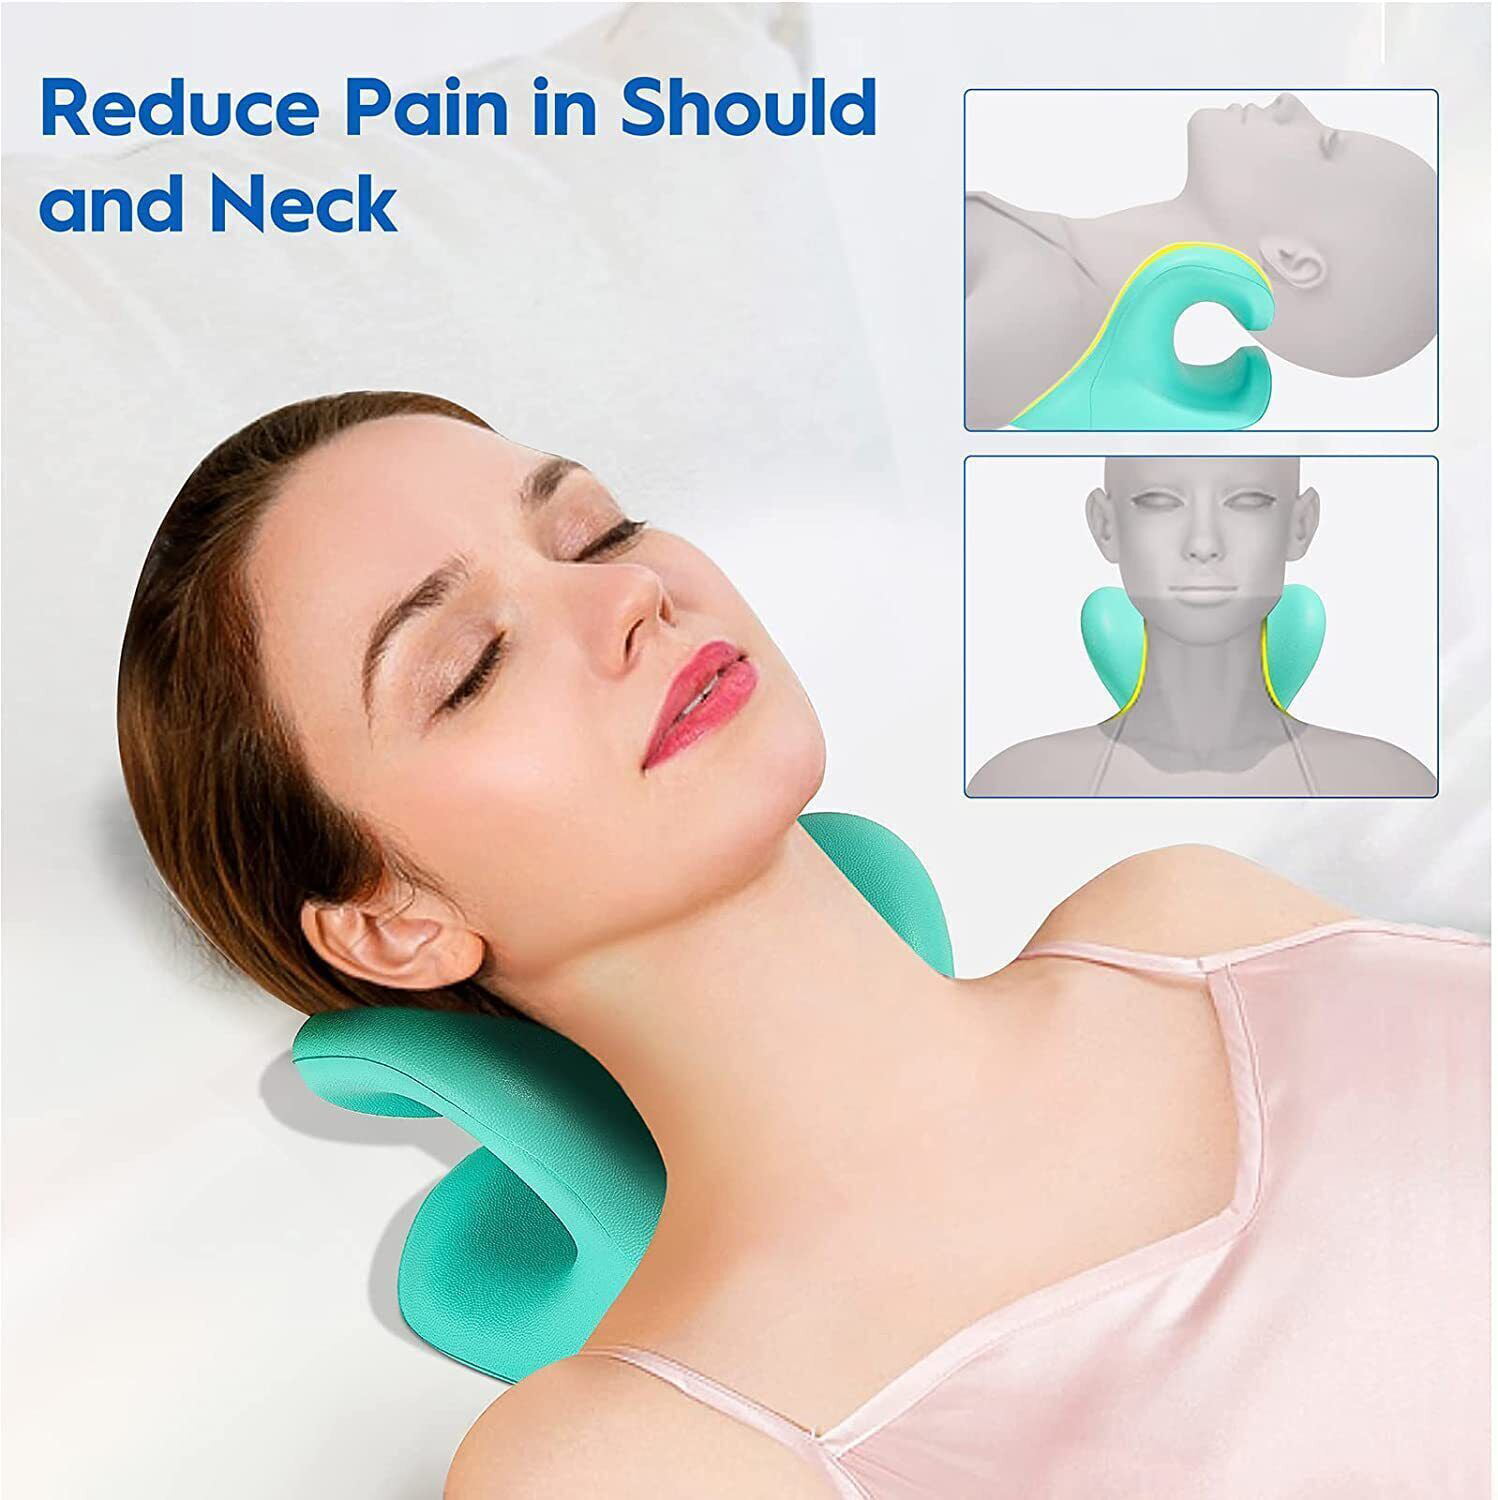 Octifie Odorless Neck Stretcher for Neck Pain Relief, Ergonomic Neck Cloud Cervical Traction Device Chiropractic Pillow for Spine Alignment, Neck